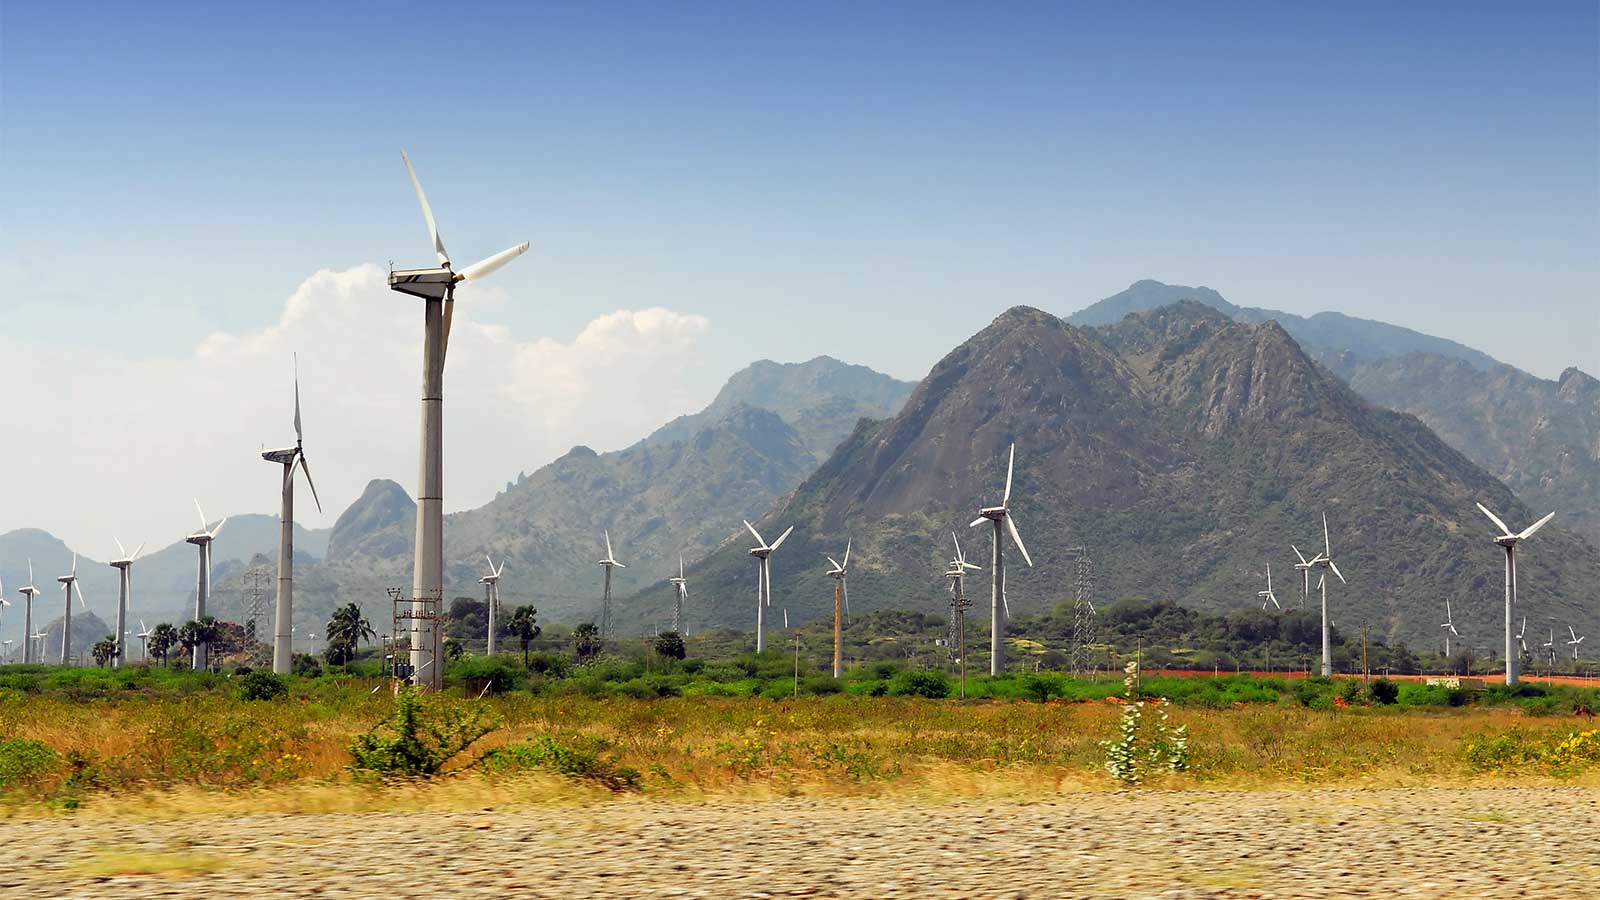 Wind turbines with a hilly landscape in the background.